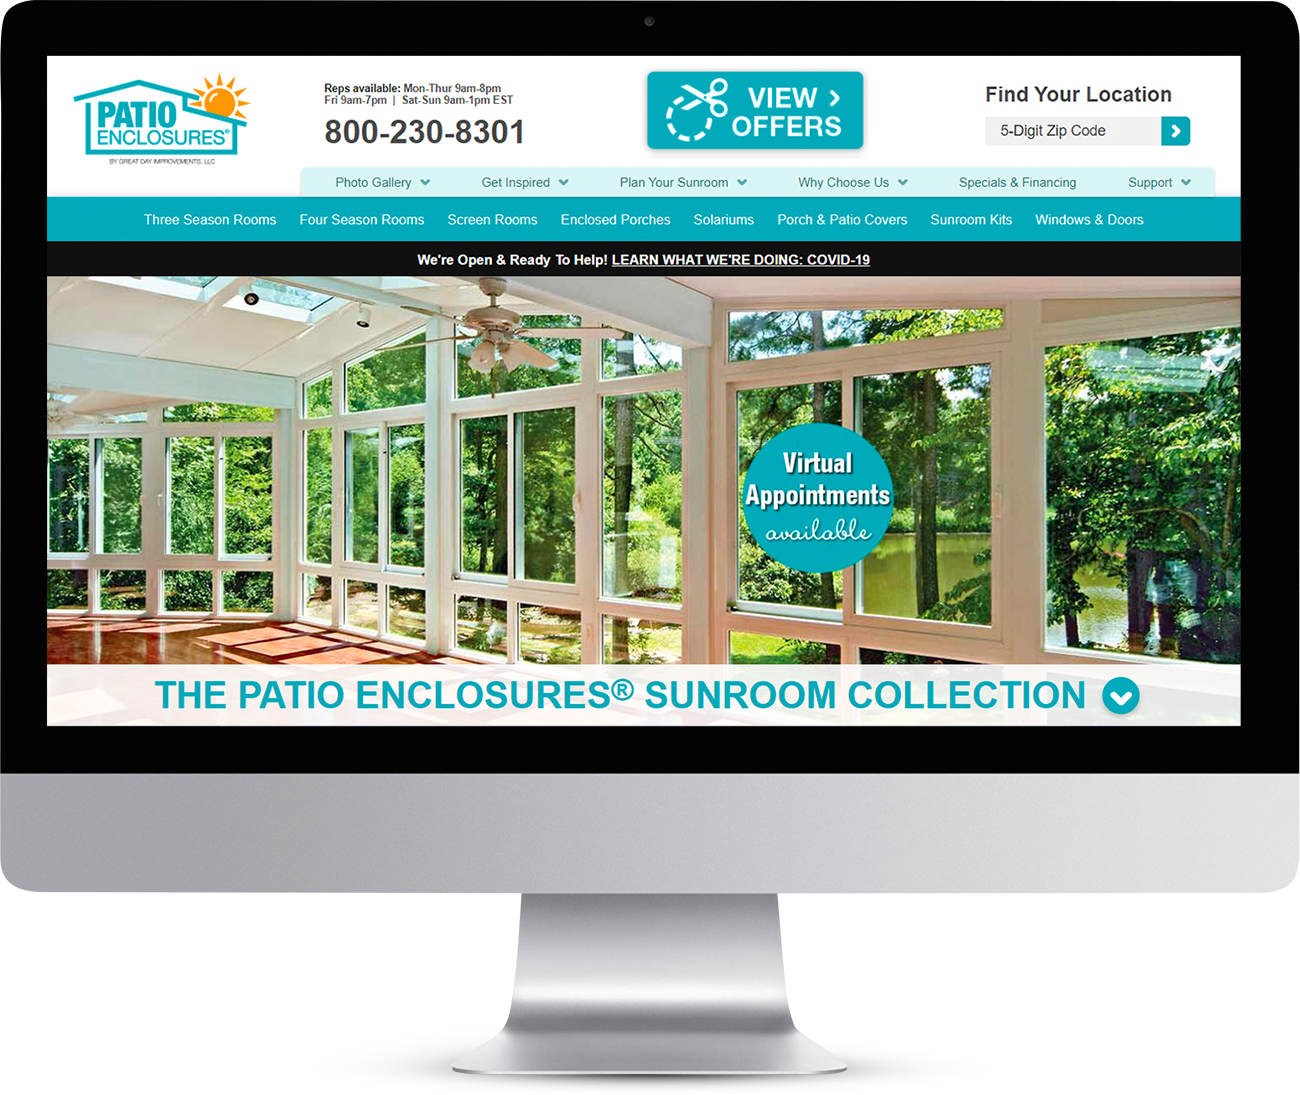 Patio Enclosures website homepage showing on a monitor screen